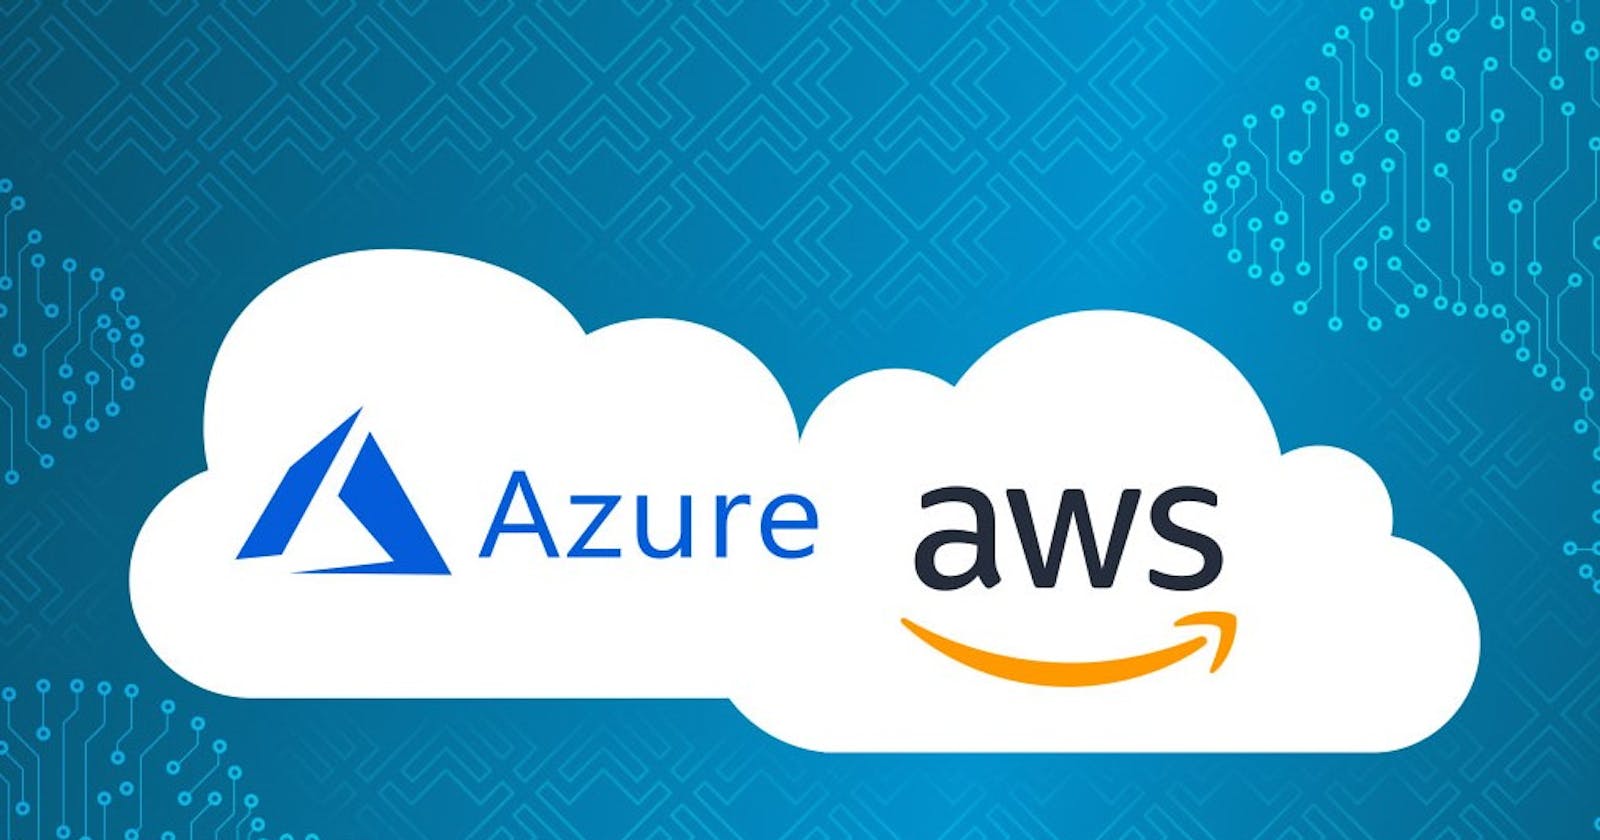 Which is more economical - Azure or AWS?